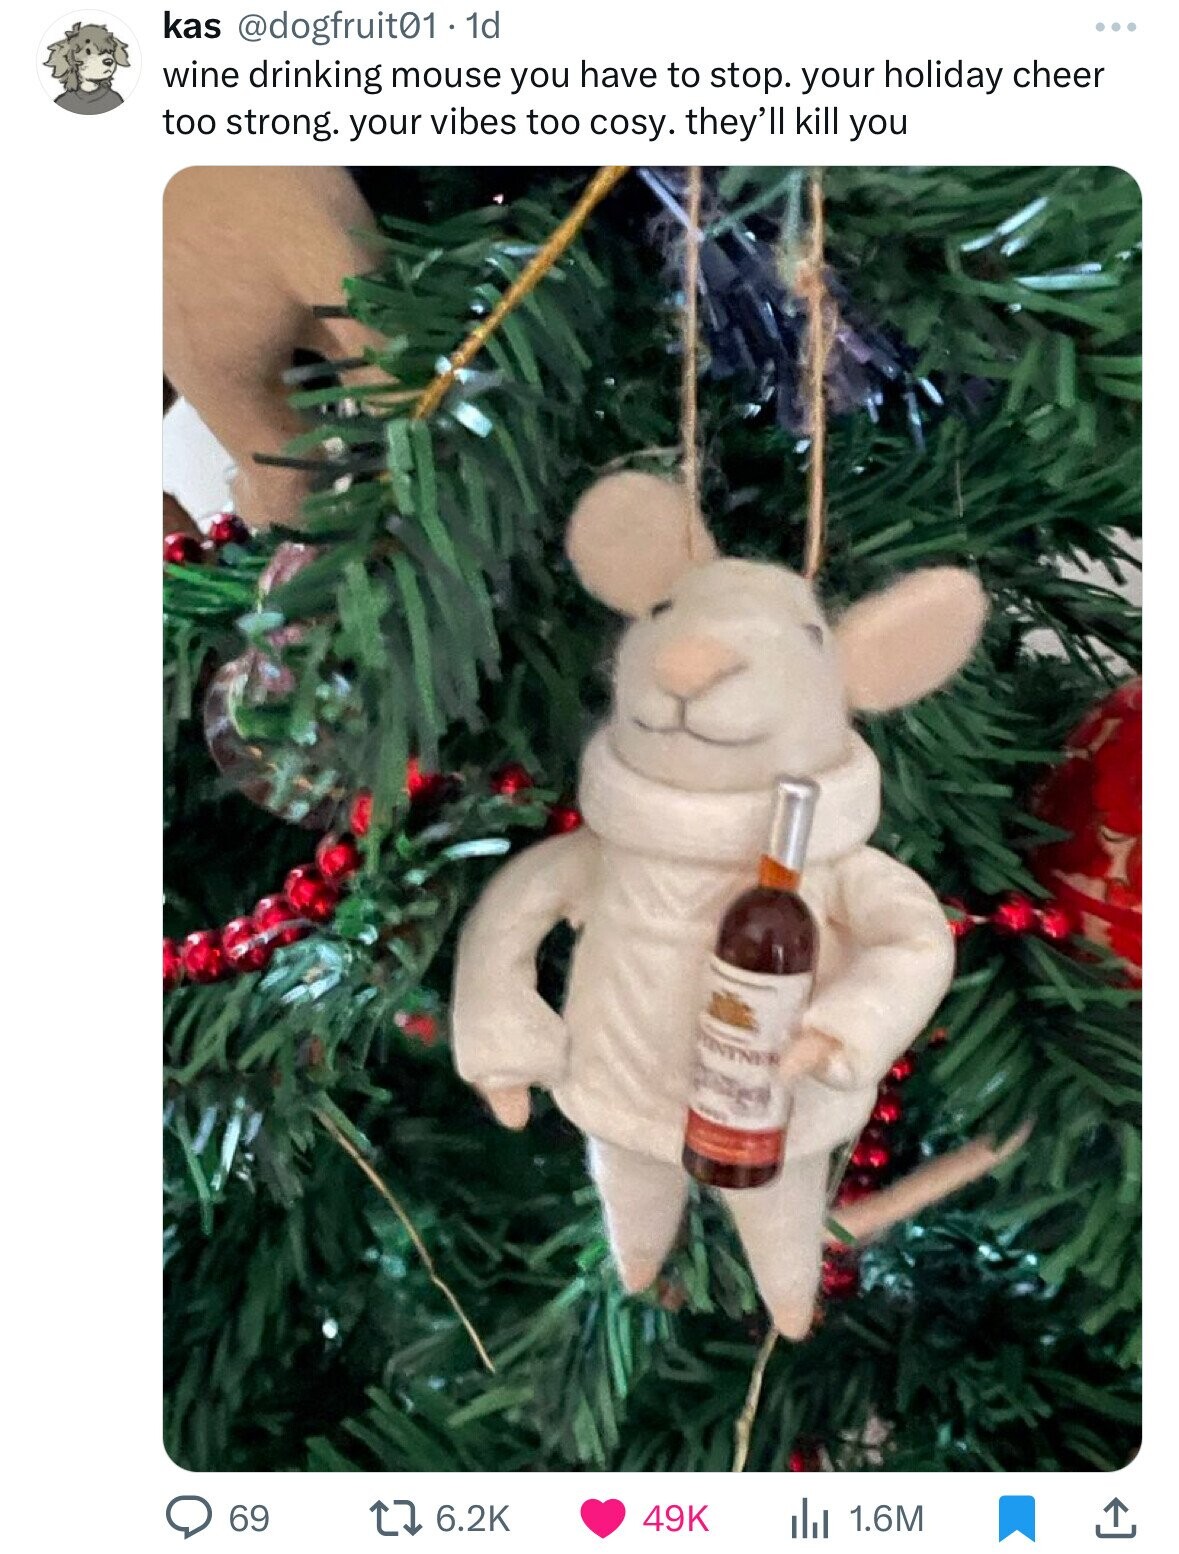 christmas - kas .1d wine drinking mouse you have to stop. your holiday cheer too strong. your vibes too cosy. they'll kill you 69 49K 1.6M